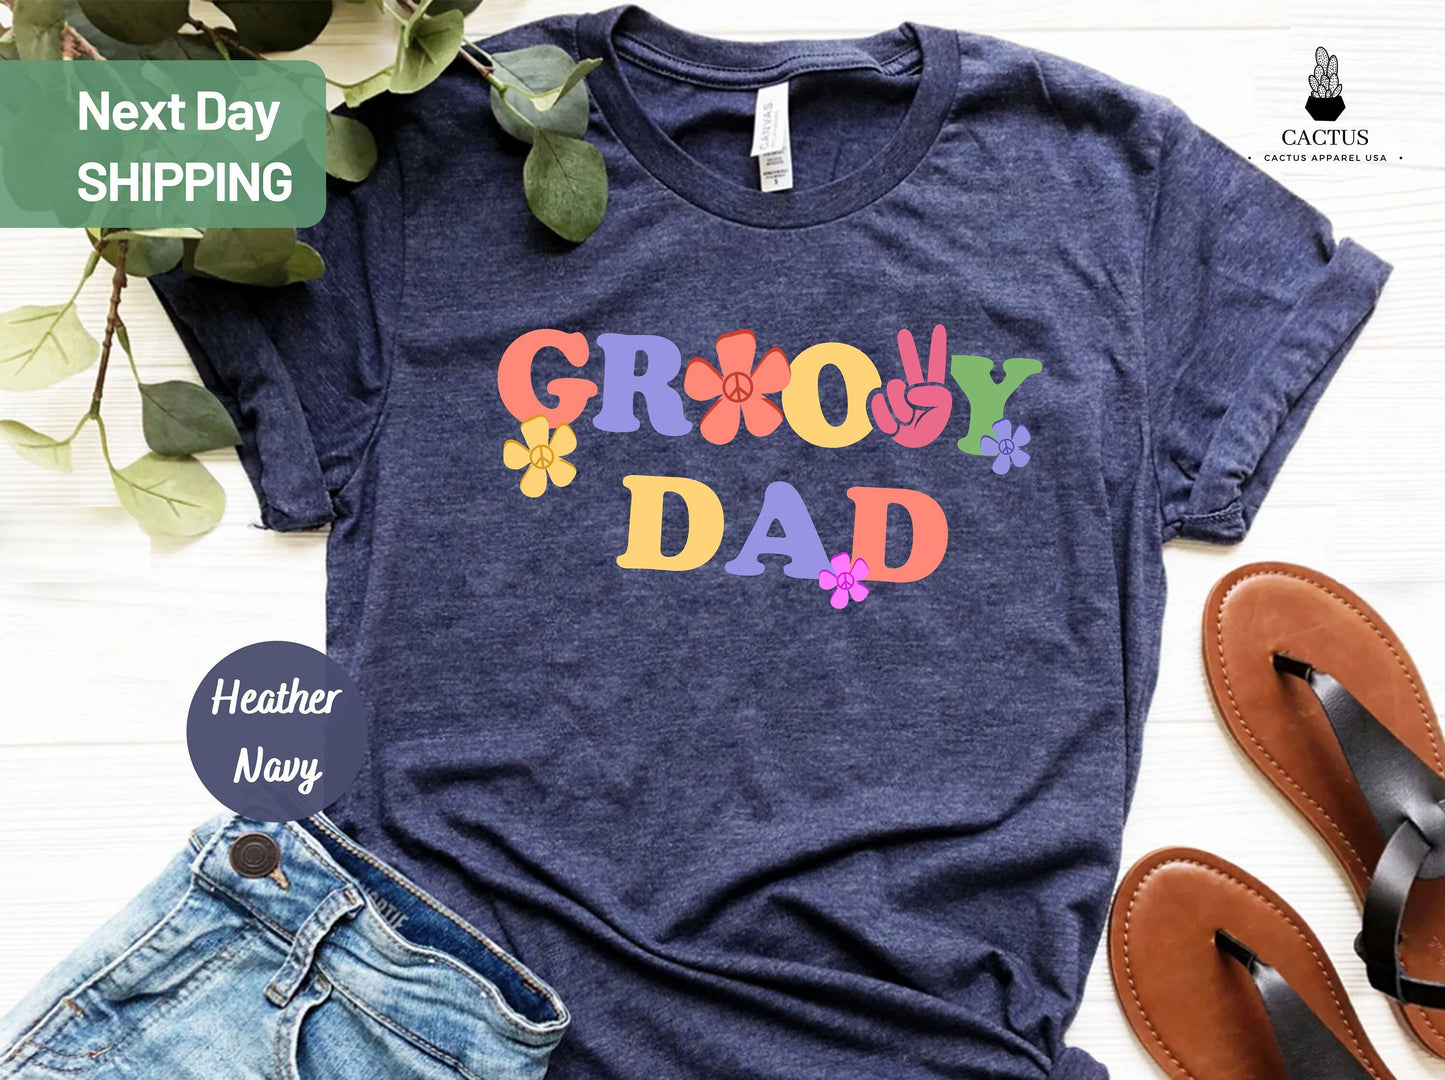 Groovy Dady Shirt, Groovy Dad Shirt, Matching Father And Me Shirt, Hippie Flower Power Shirt, Groovy Vibes Shirt